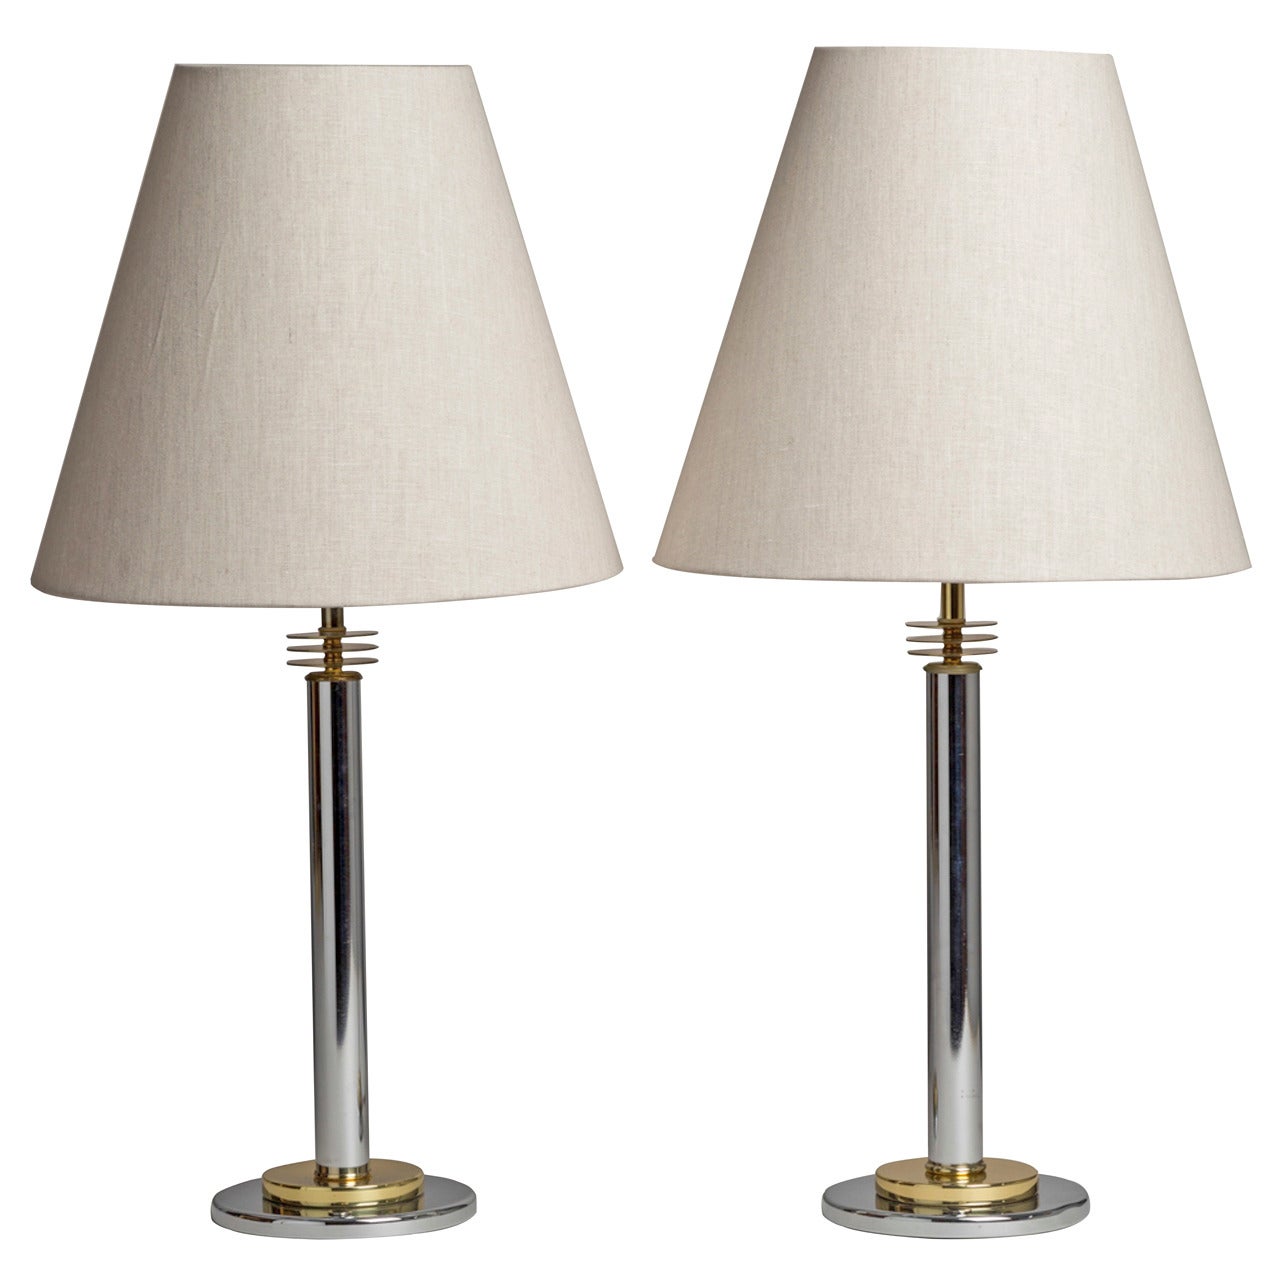 Pair of Brass and Nickel Lamps in the Manner of Paul Evans